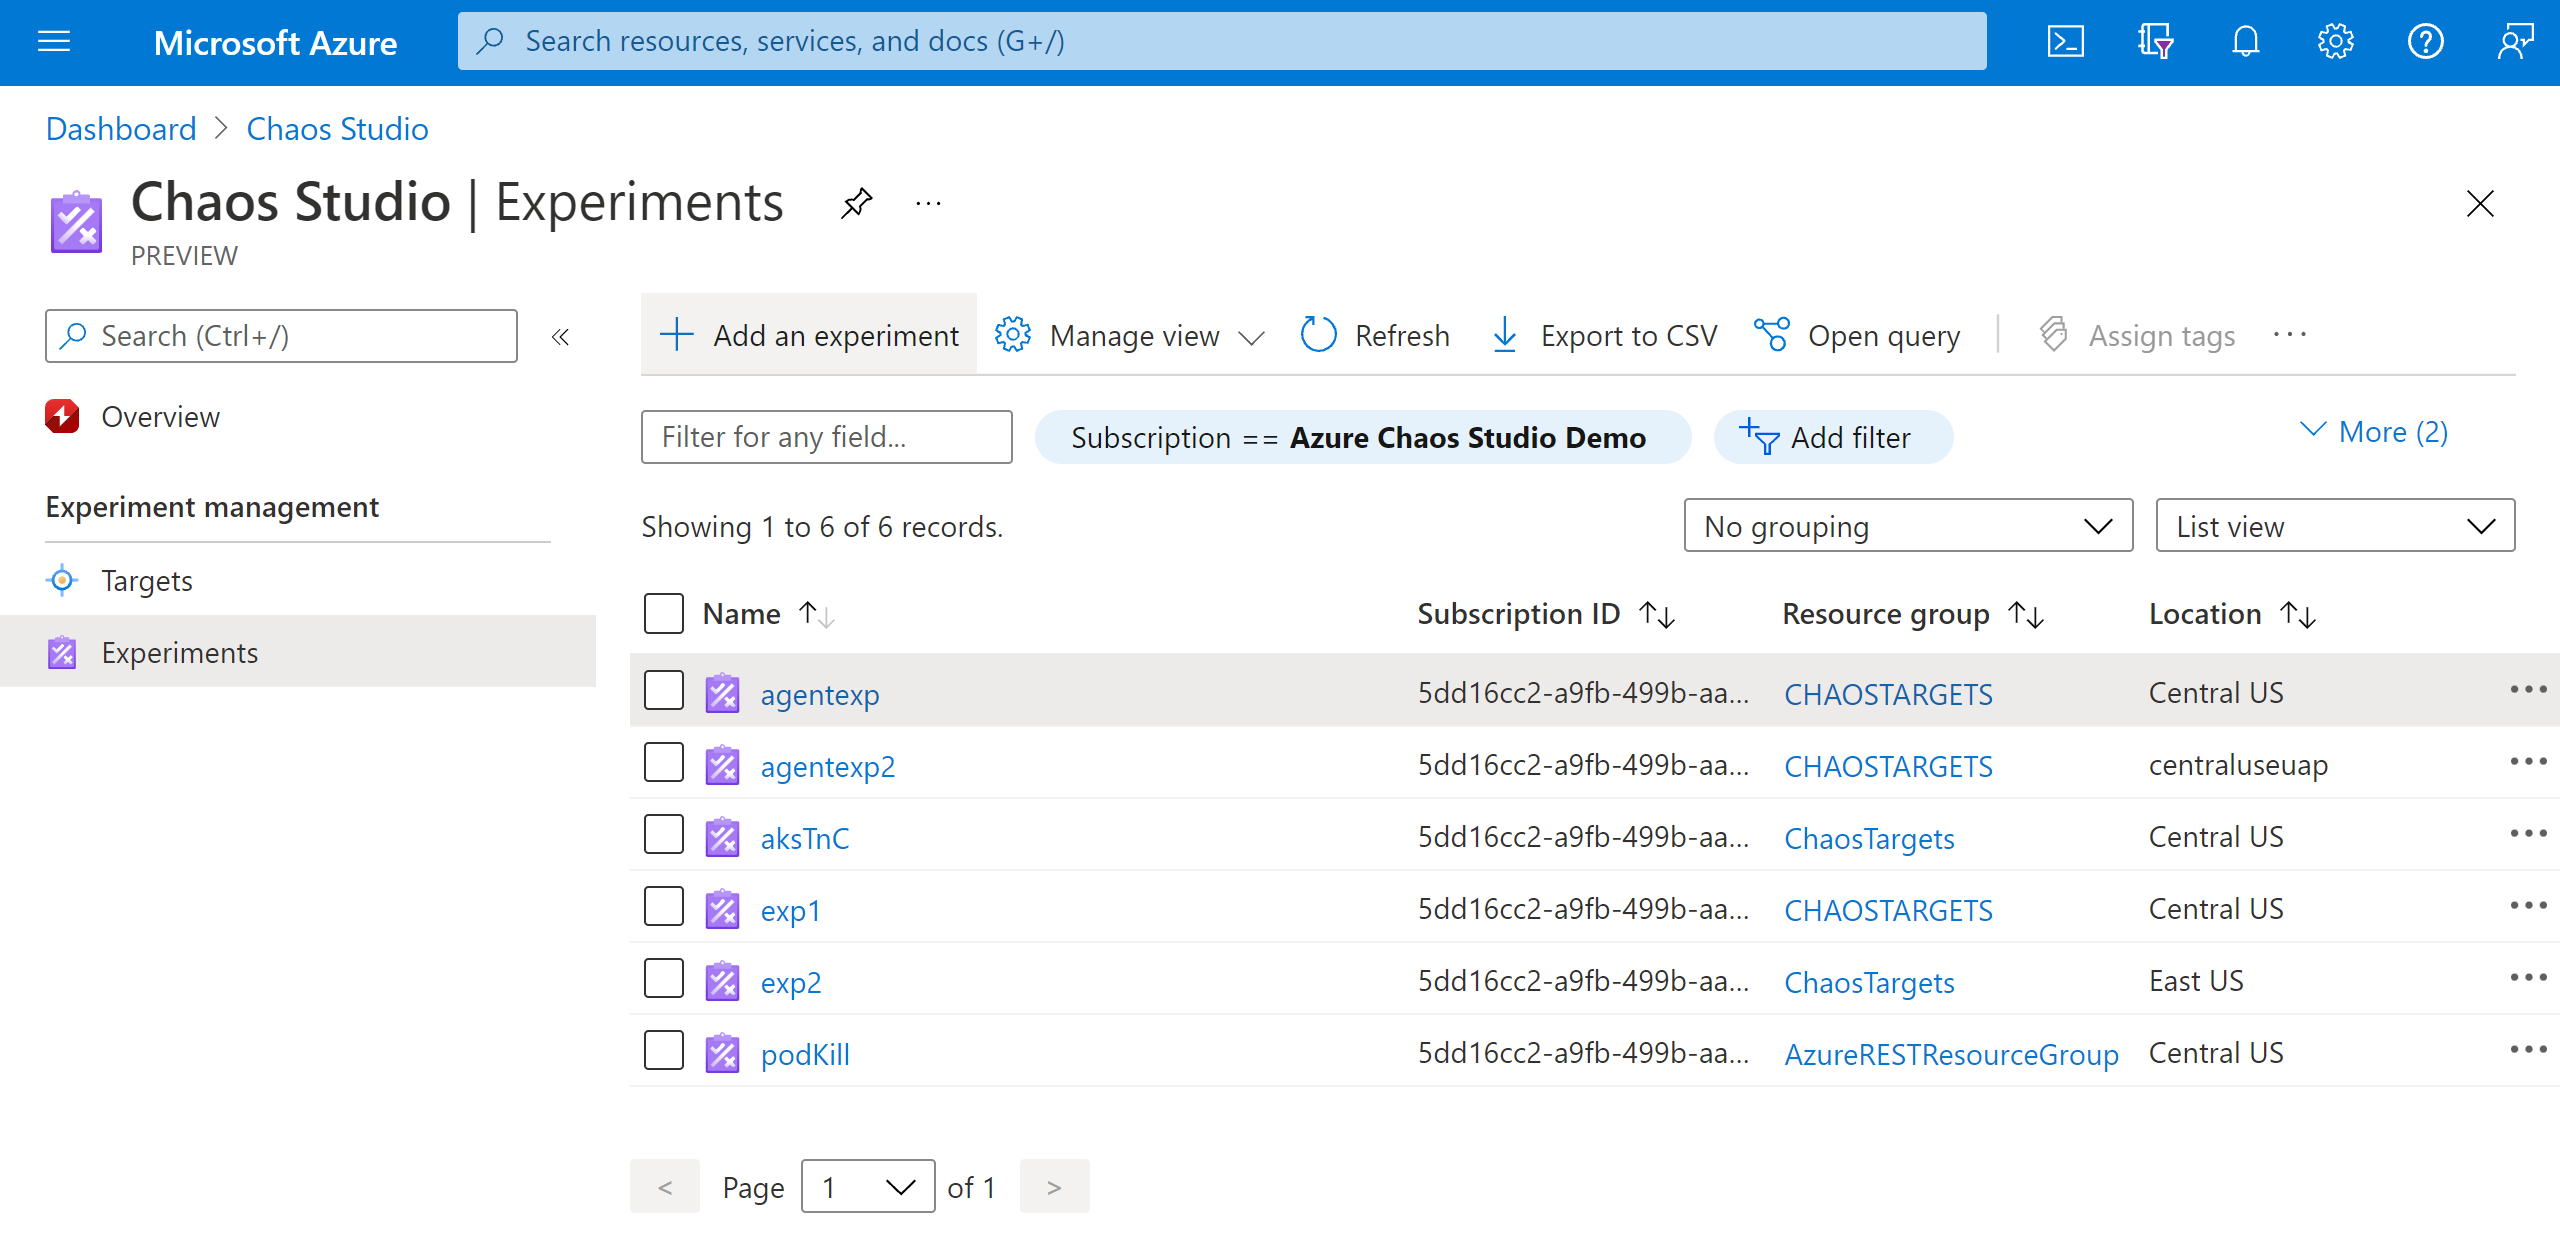 Screenshot that shows the Experiments view in the Azure portal.